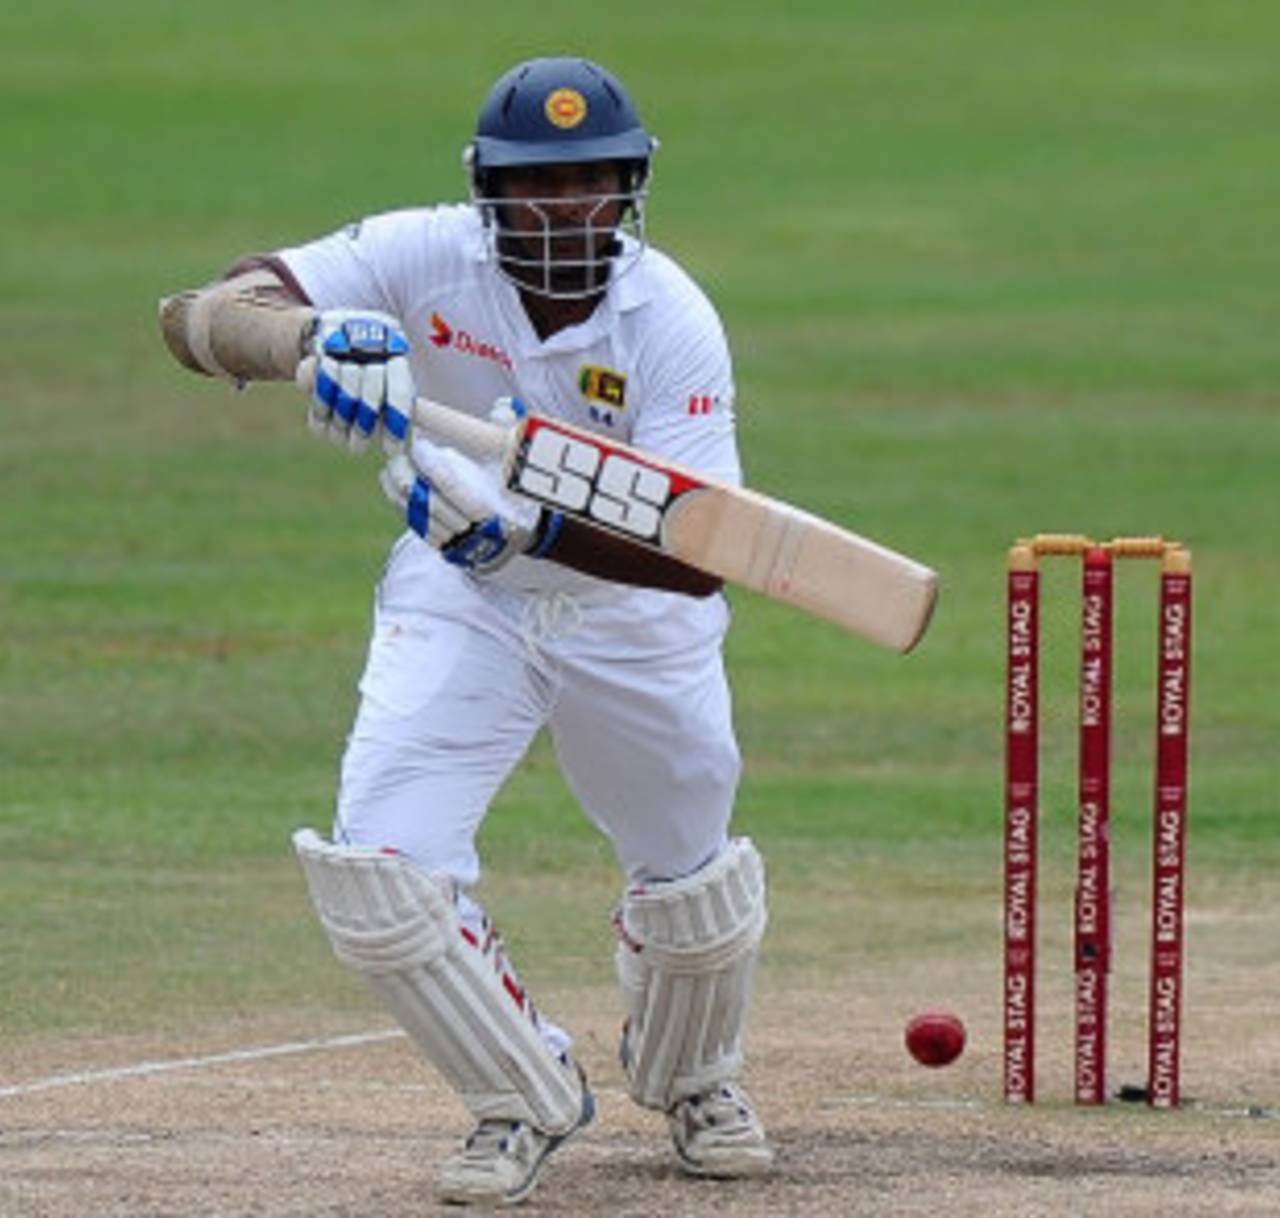 Kumar Sangakkara was fluent in the second innings, Sri Lanka v South Africa, 2nd Test, Colombo, 4th day, July 27, 2014